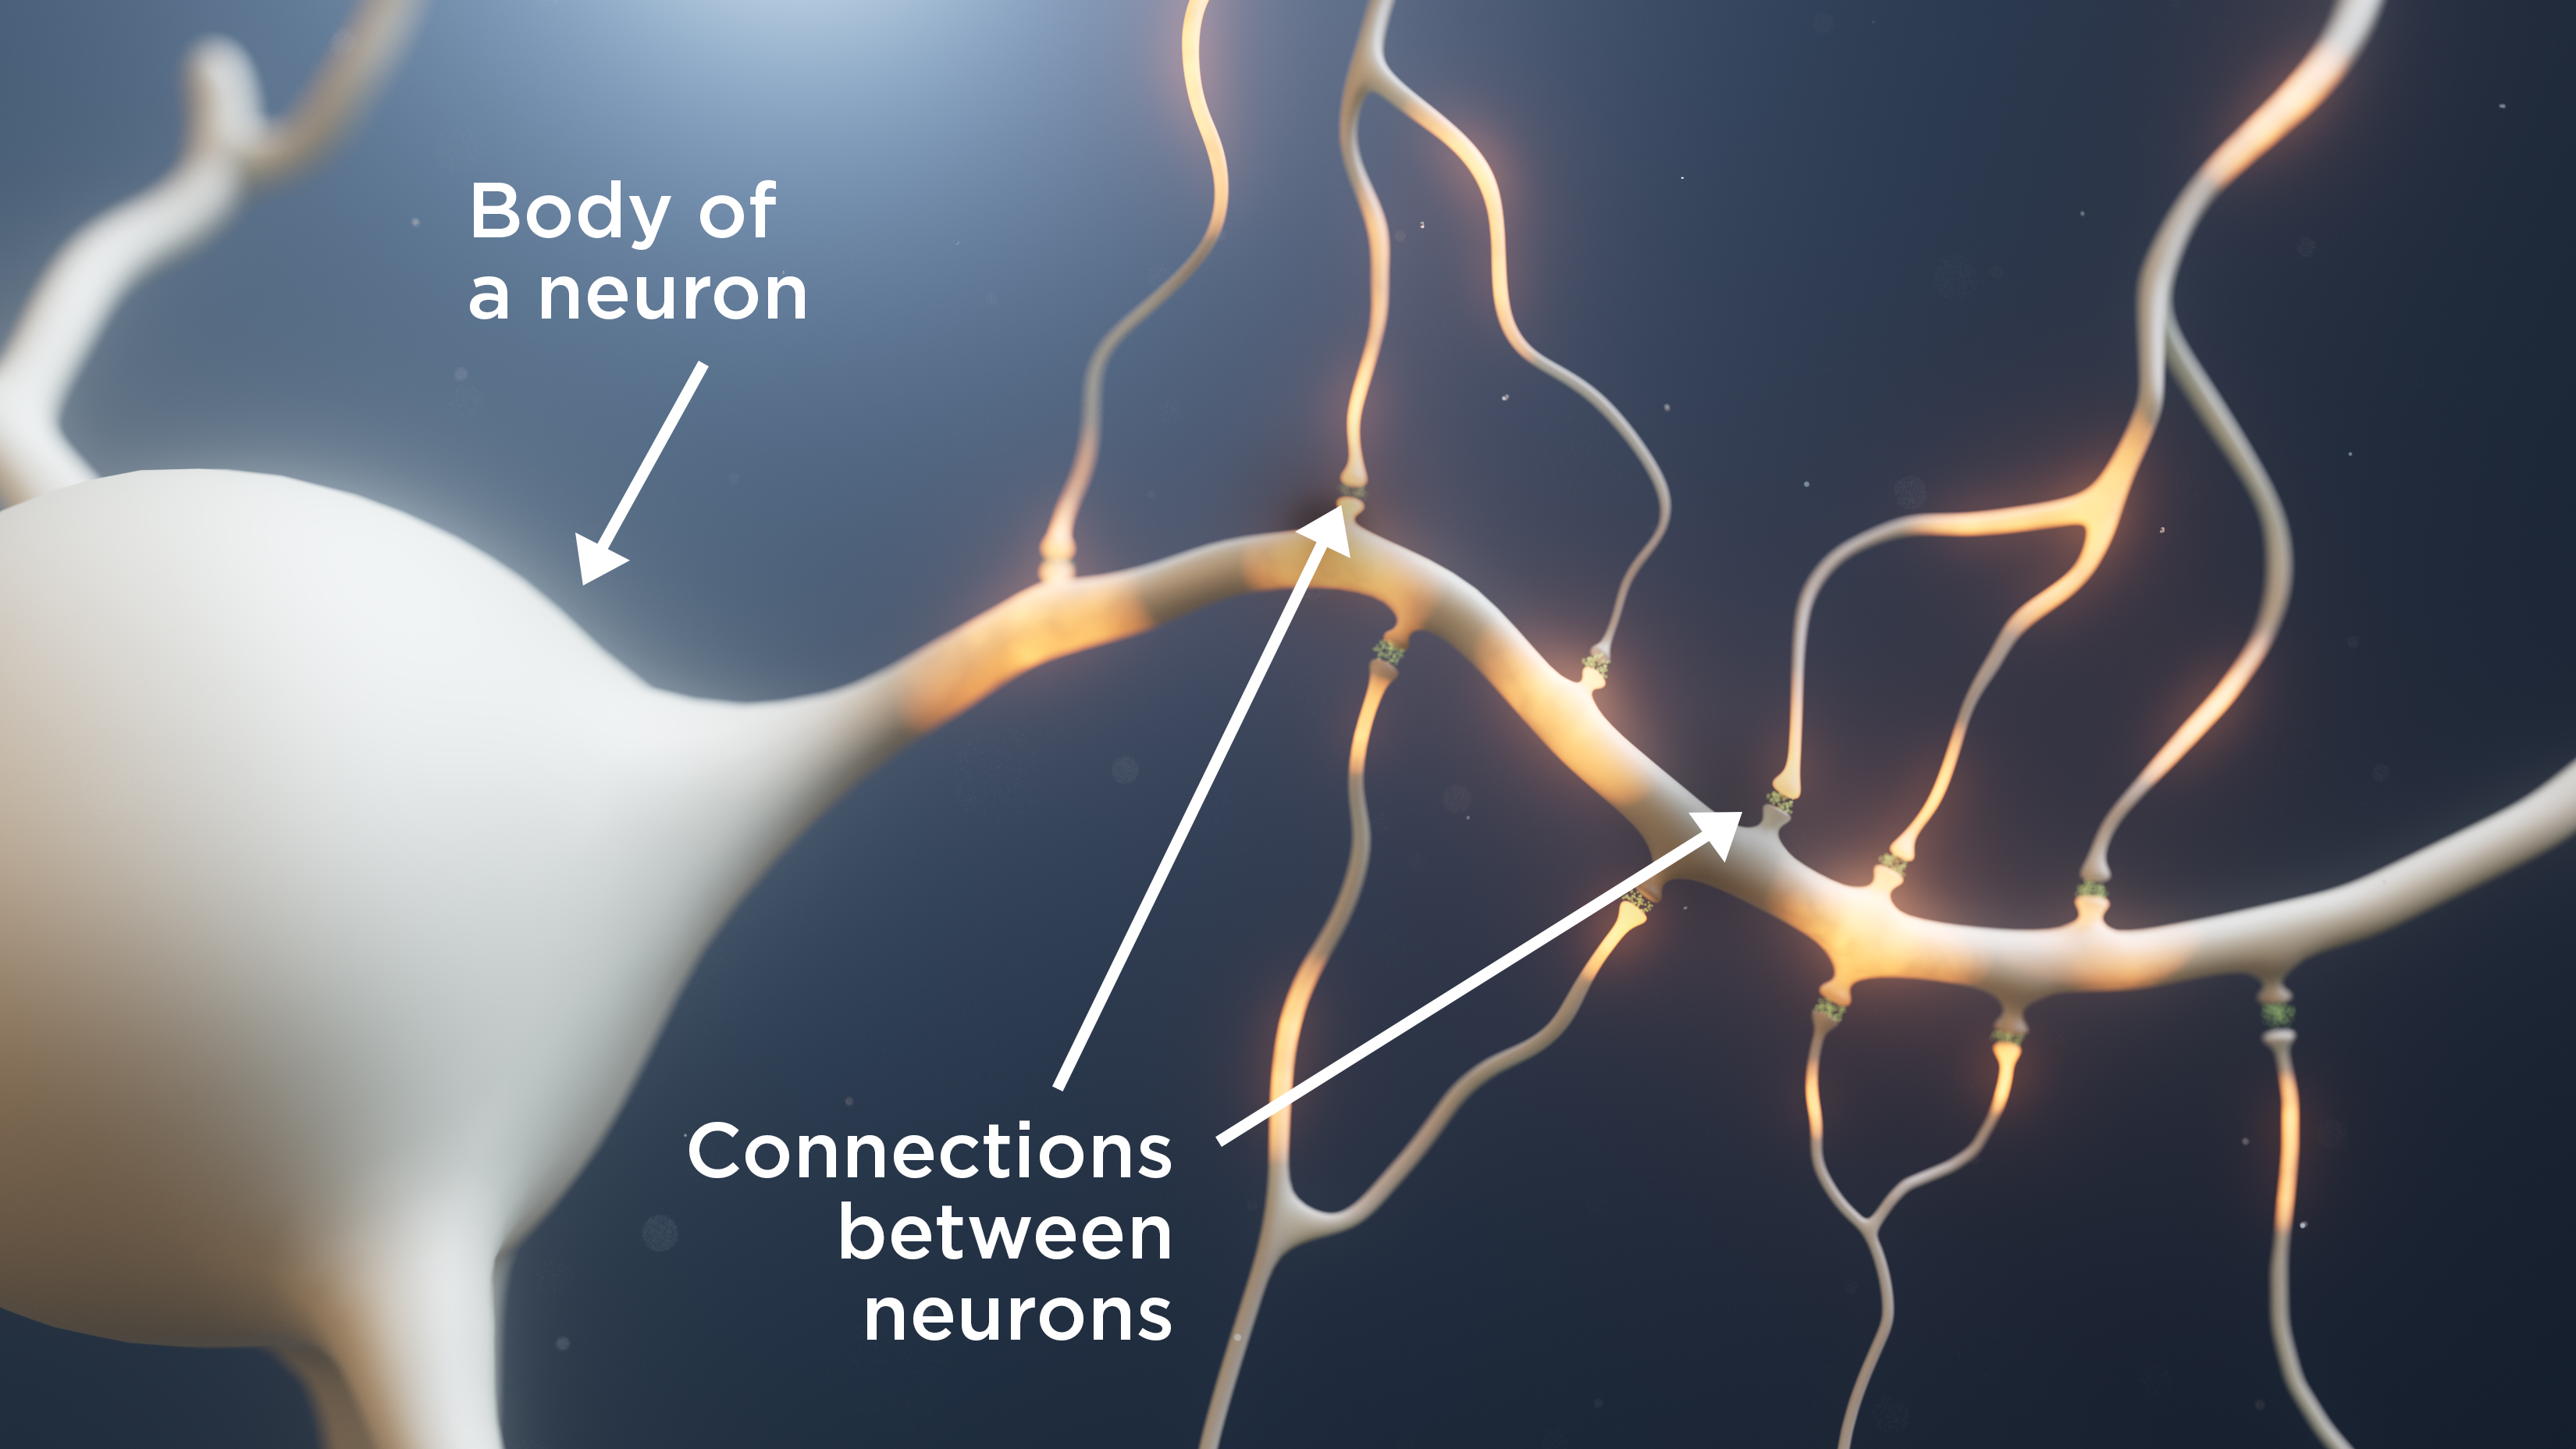 The body of the nerve cell, and the tentacle-like nerve cell endings connected to other cells